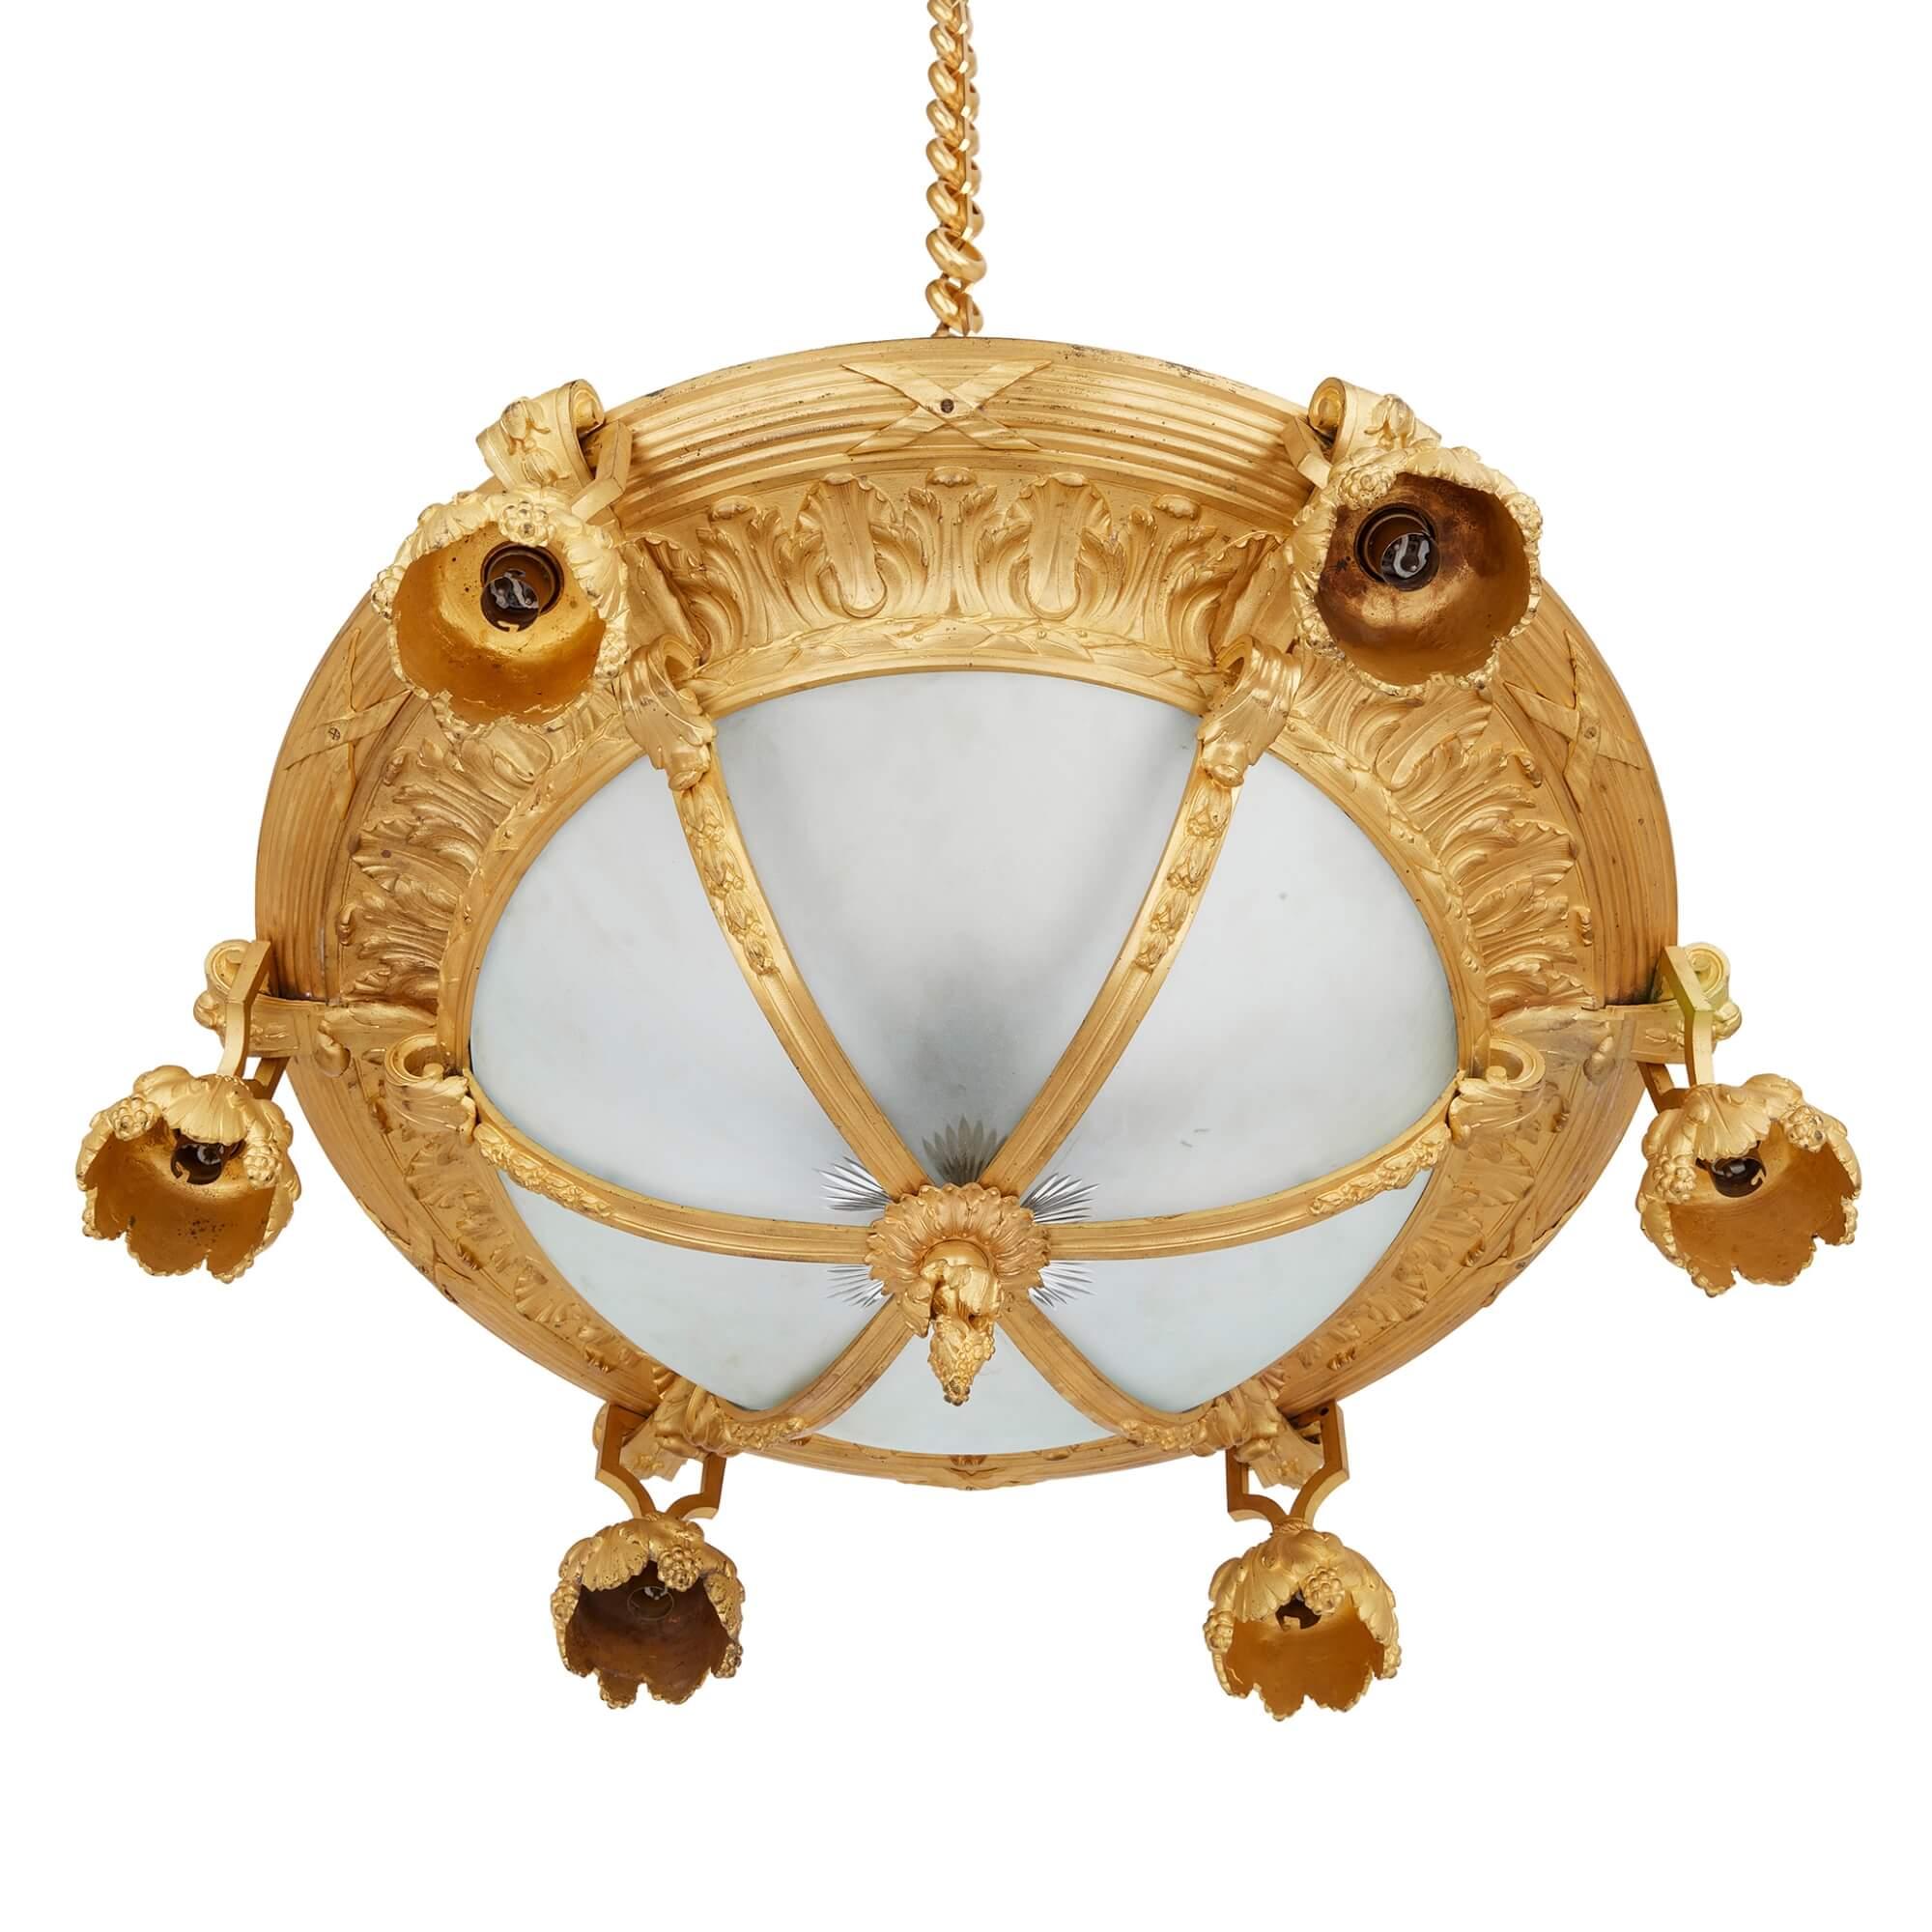 19th century French gilt bronze and glass six-light chandelier 
French, Late 19th Century 
Height 30cm, diameter 72cm

This very elegant late 19th century French six-light chandelier is crafted from frosted glass and gilt bronze and is of an unusual